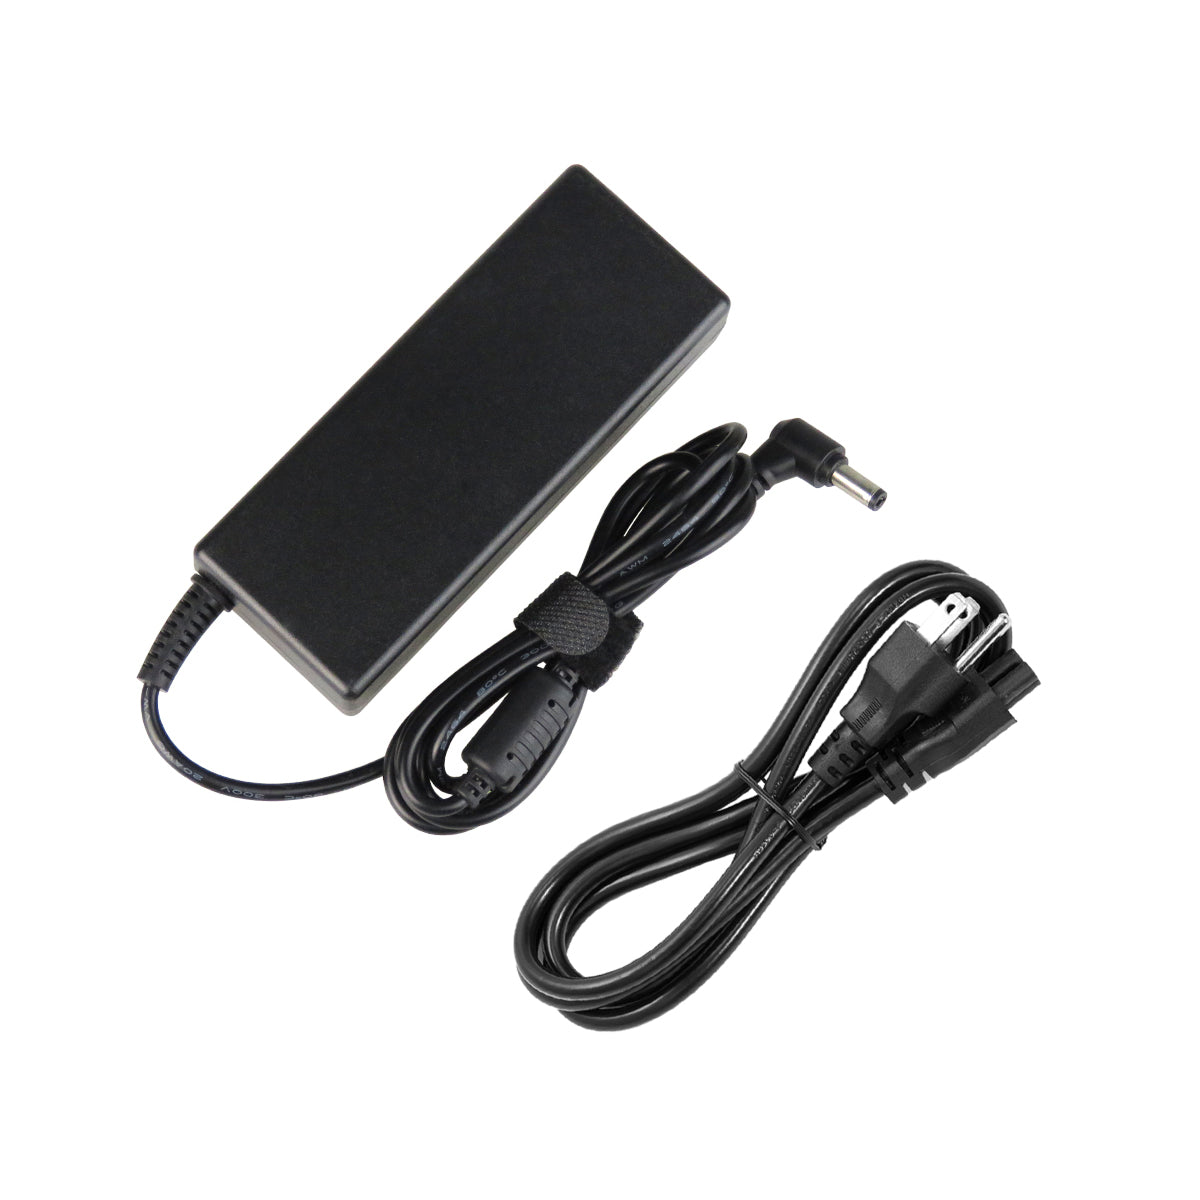 AC Adapter Charger for Lenovo 45J7717 Notebook.